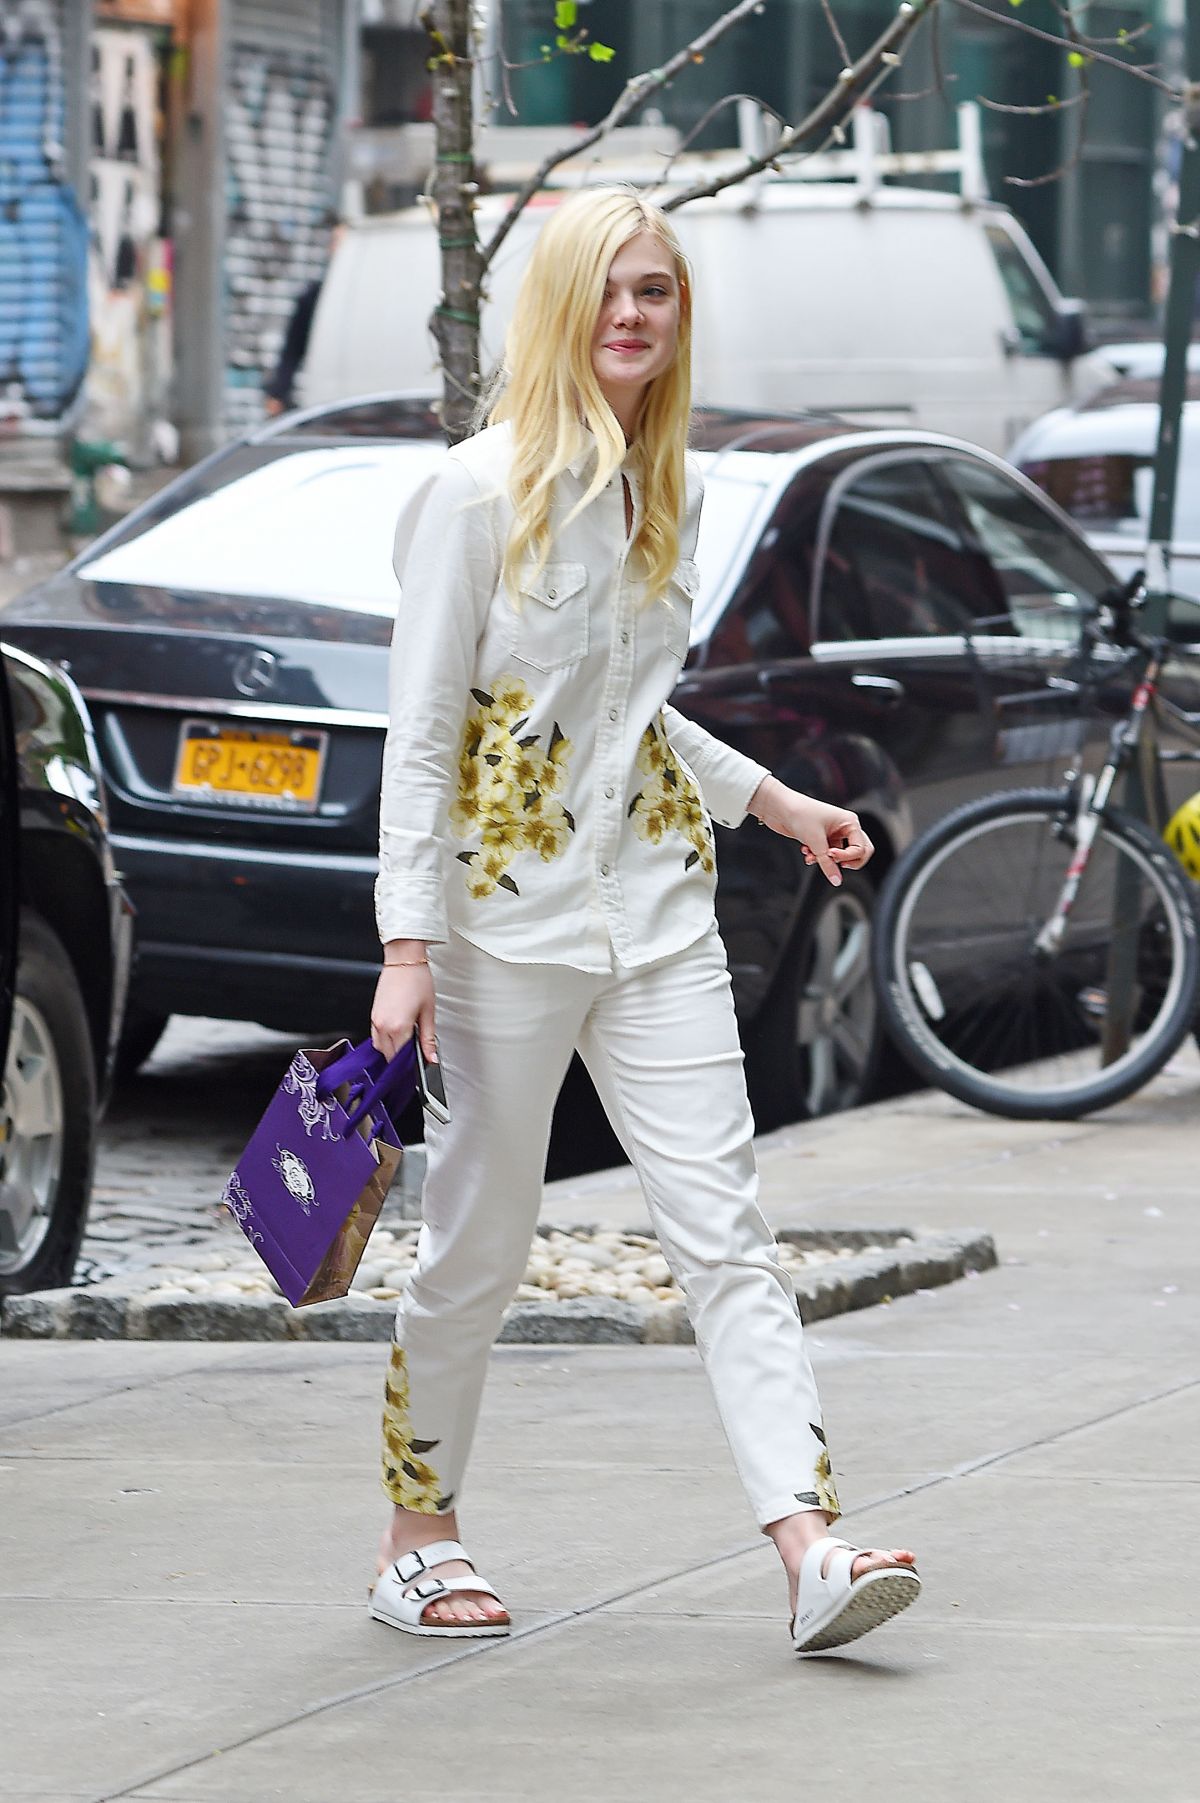 ELLE FANNING Out and About in New York 1505